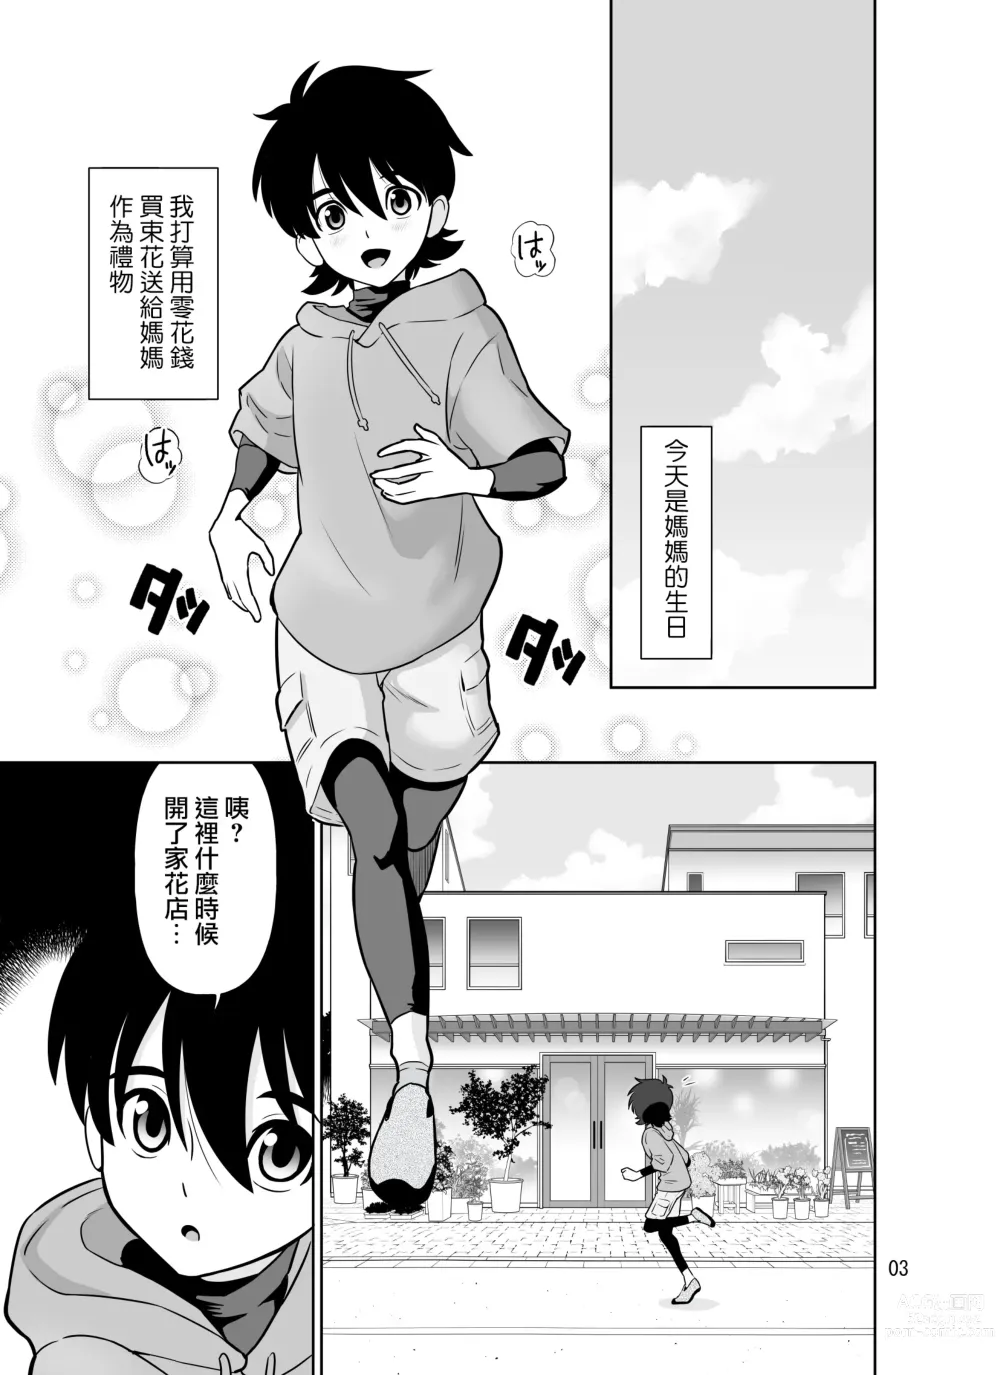 Page 3 of doujinshi 触手花店的大姐姐